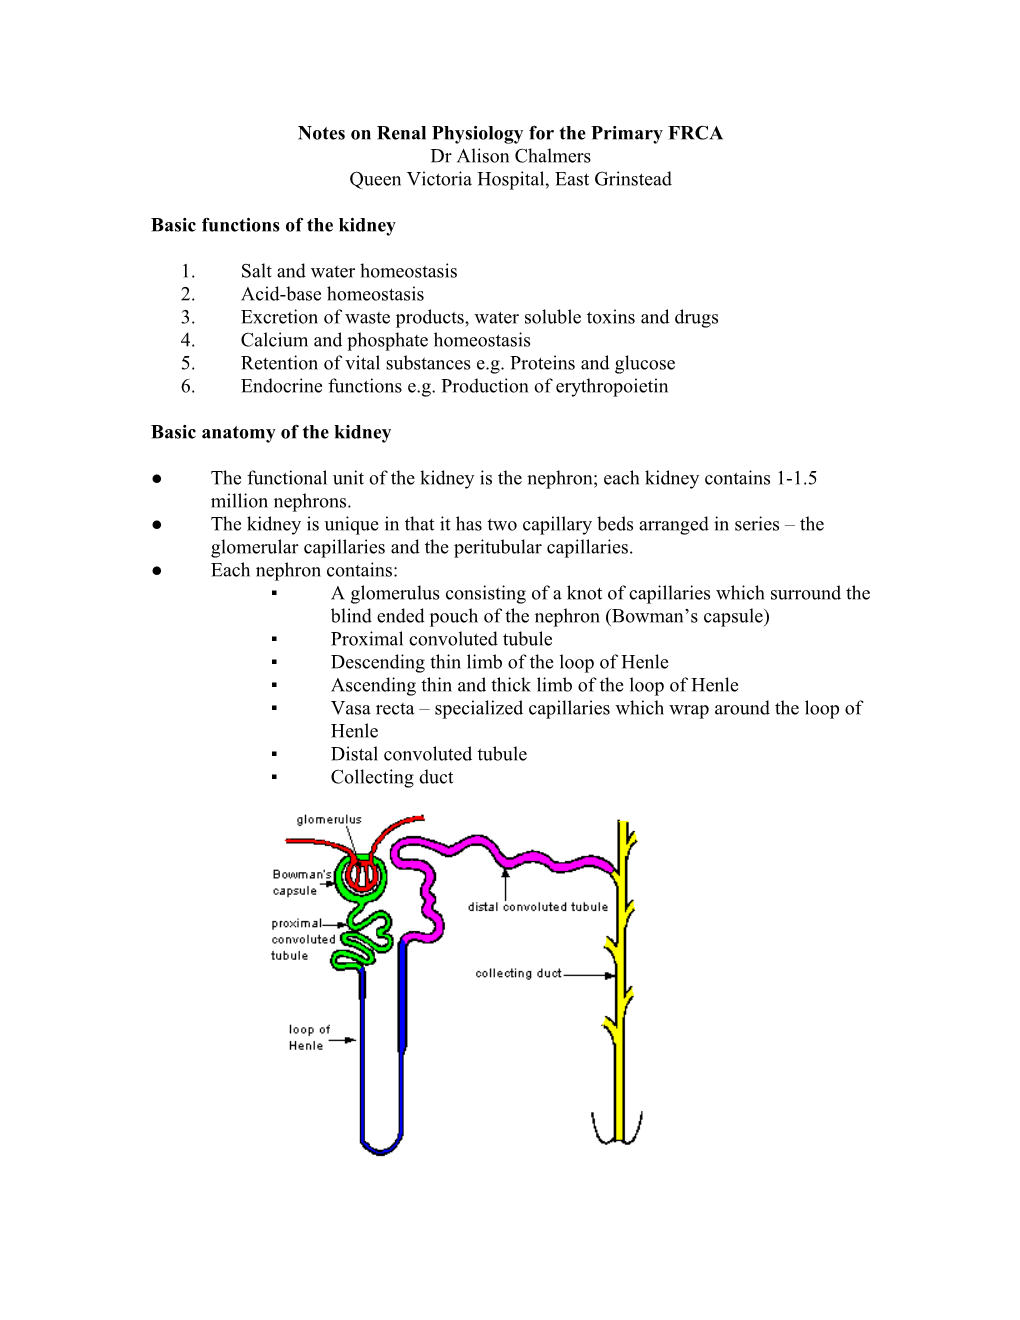 Renal Physiology for the Primary FRCA